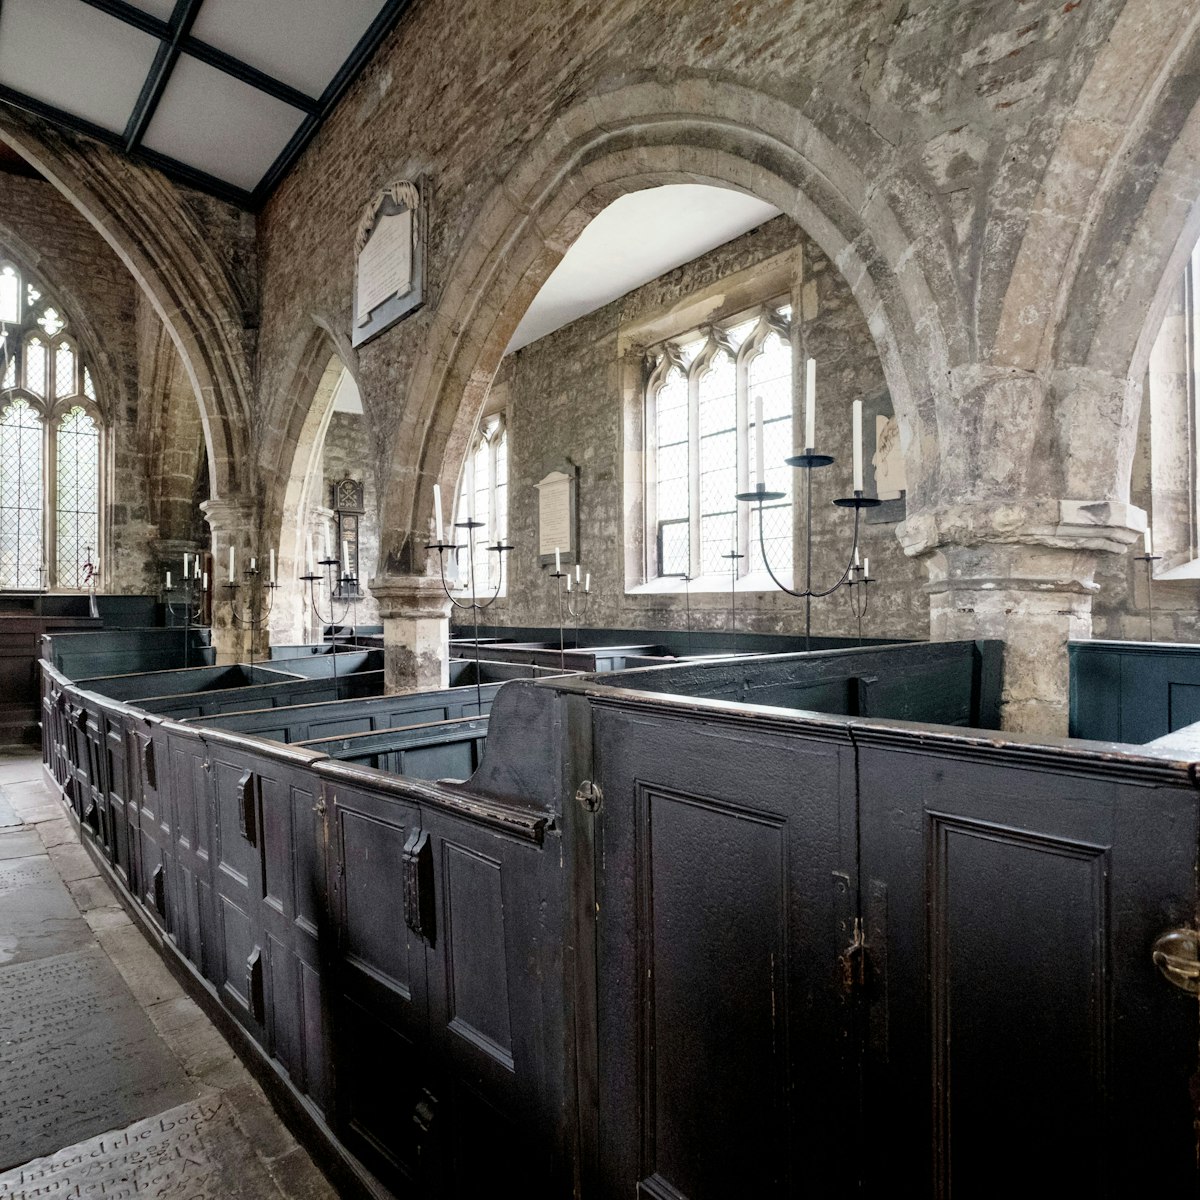 York England UK. May 2018. Interior of Holy Trinity Church, Goodramgate. Photo shows the original, very rare, wooden box pews where families prayed together. A hidden treasure 
Church of the Holy Trinity

.; Shutterstock ID 1121785949; your: Bridget Brown; gl: 65050; netsuite: Online Editorial; full: POI Image Update